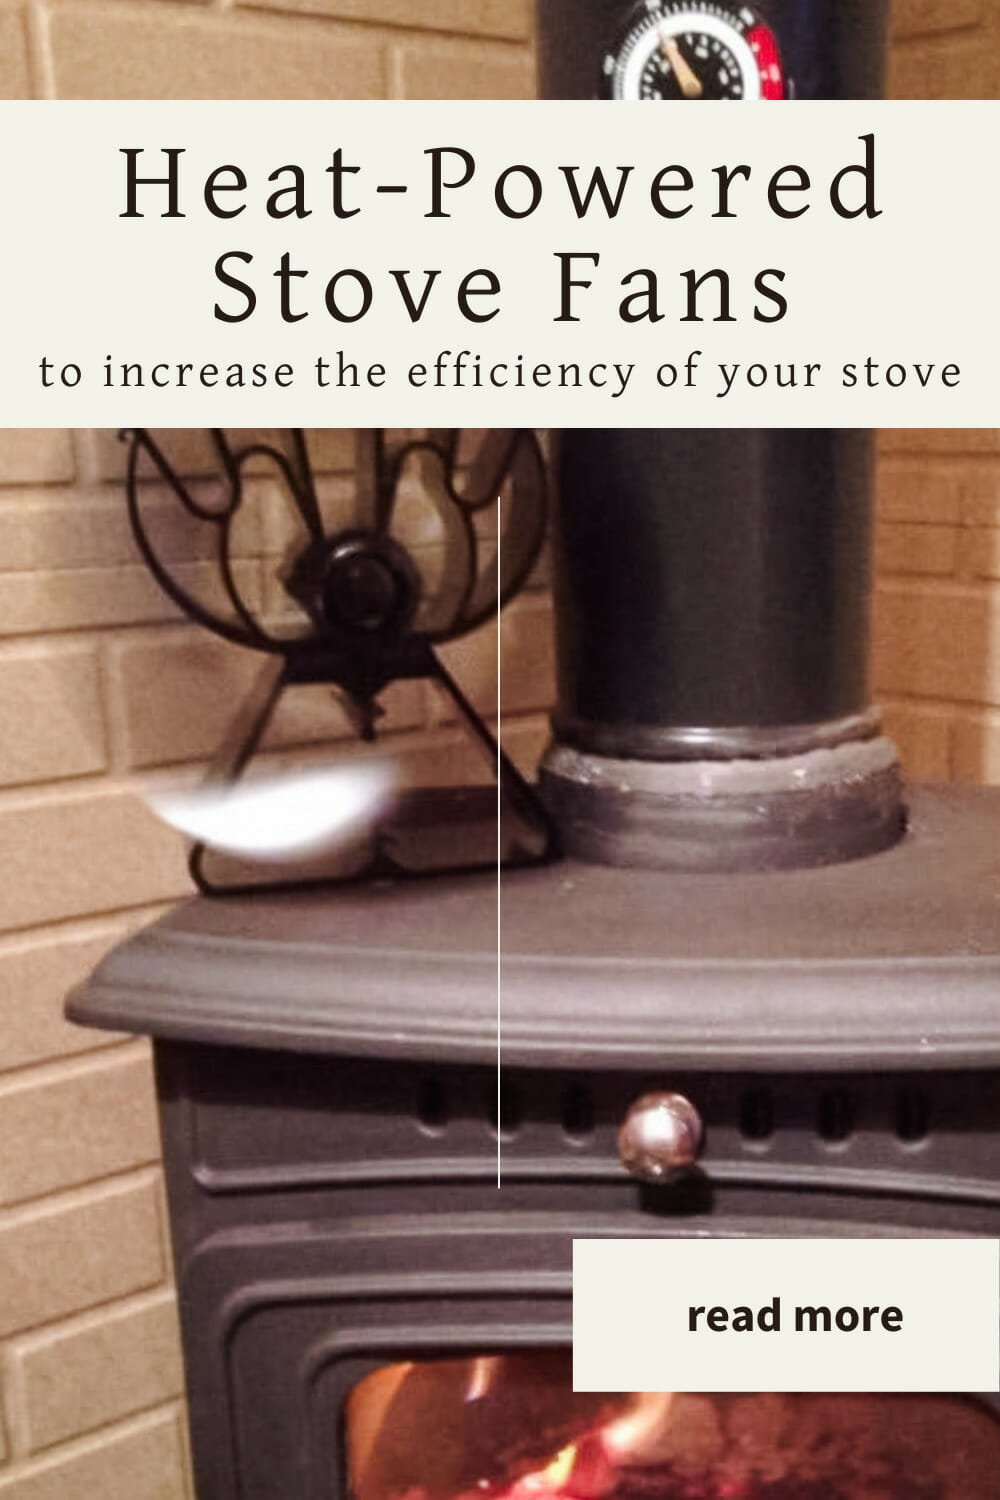 A pinterest-friendly graphic promoting the benefits of heat-powered stove fans.